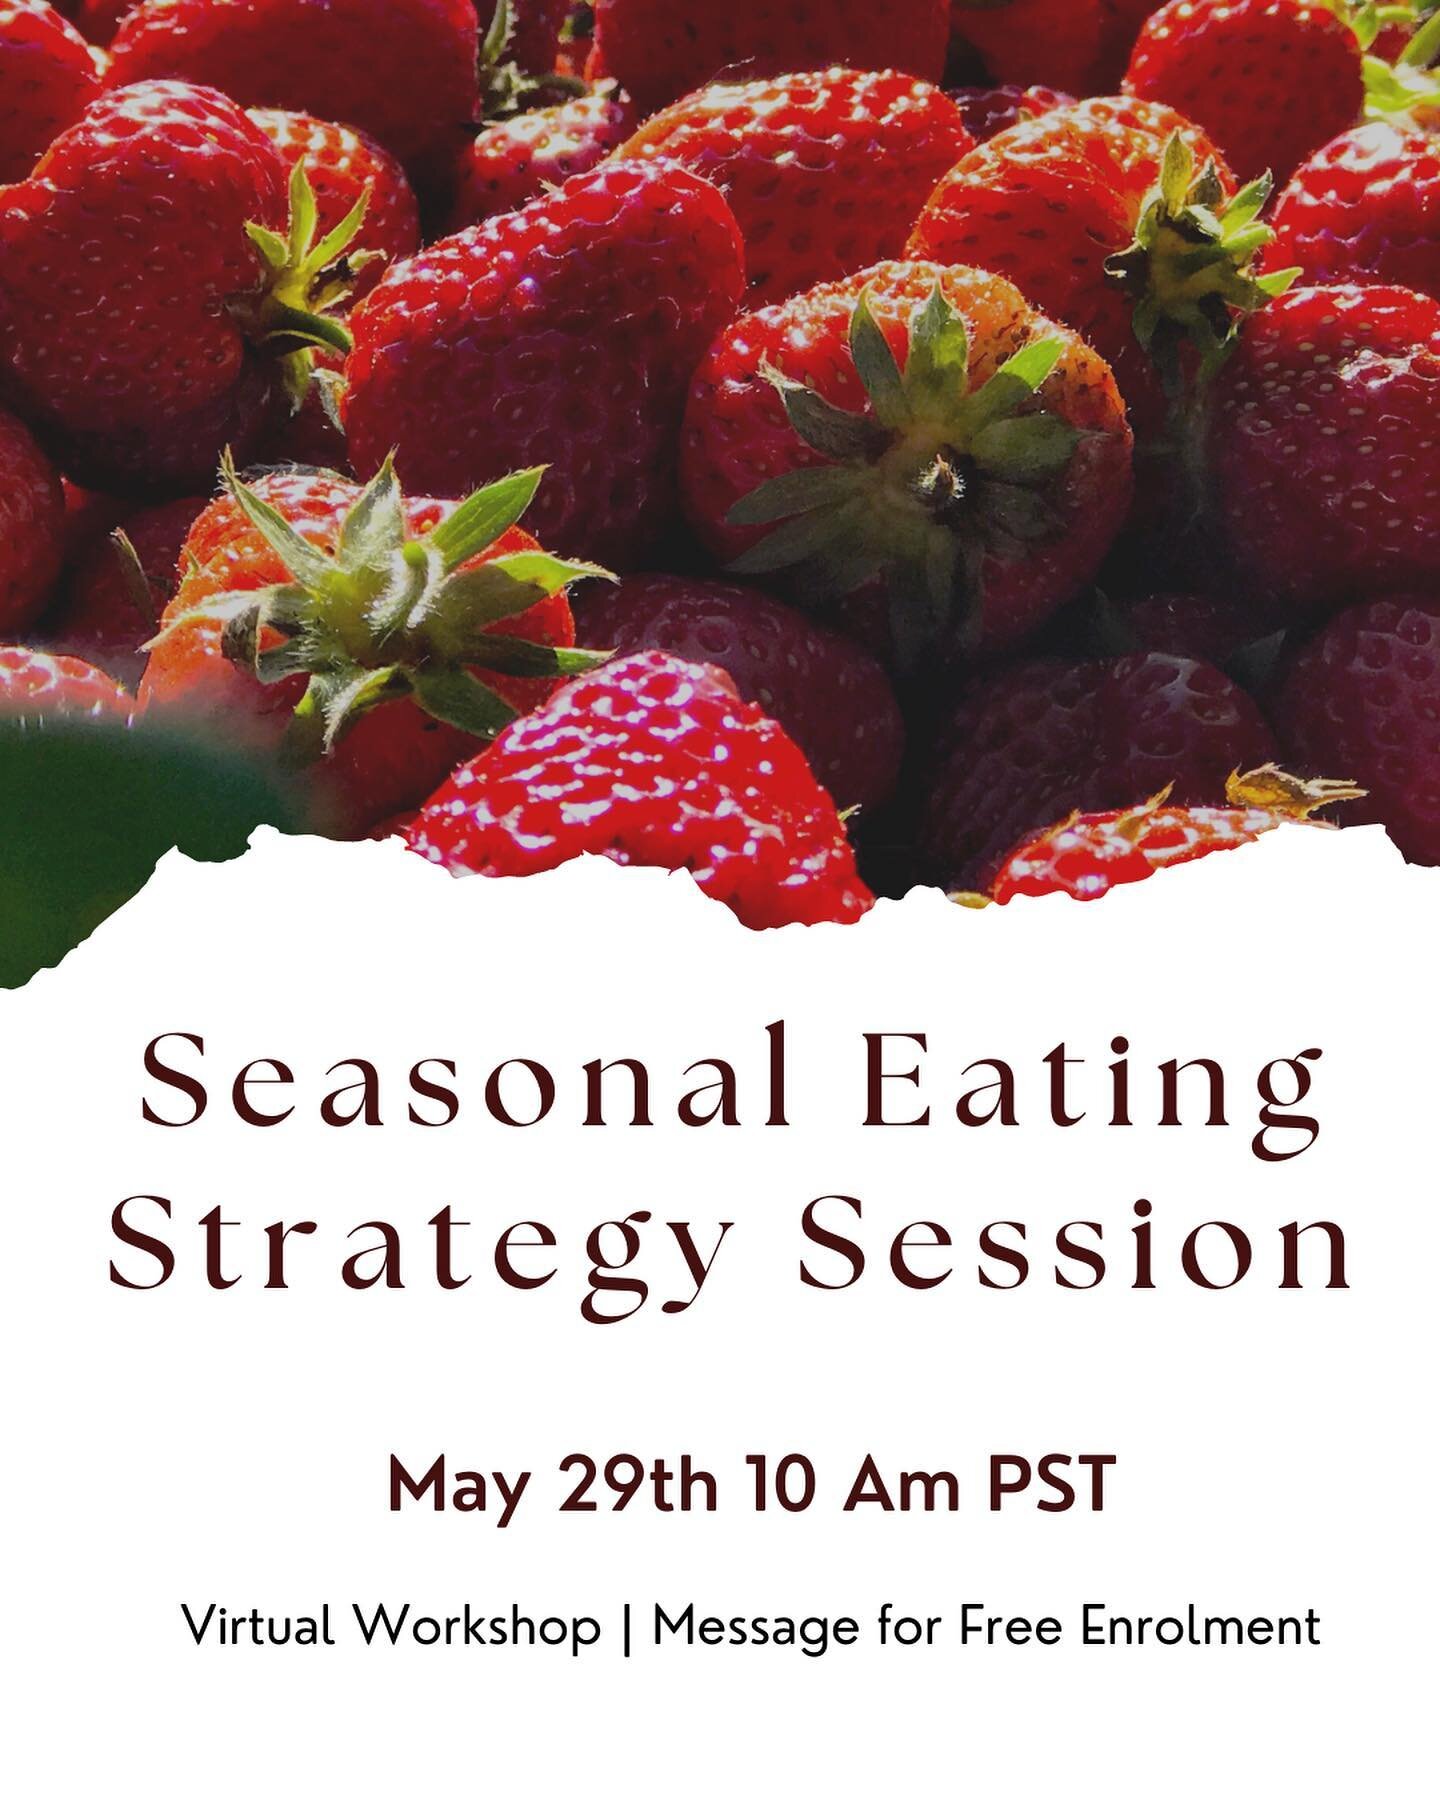 Seasonal Eating Strategy Session 

Reflect on the past month and gather renewed inspiration from the fields. Strategize and set intentions for June. 

In the coming month we transition out of spring and into the early days of summer. How might we lea